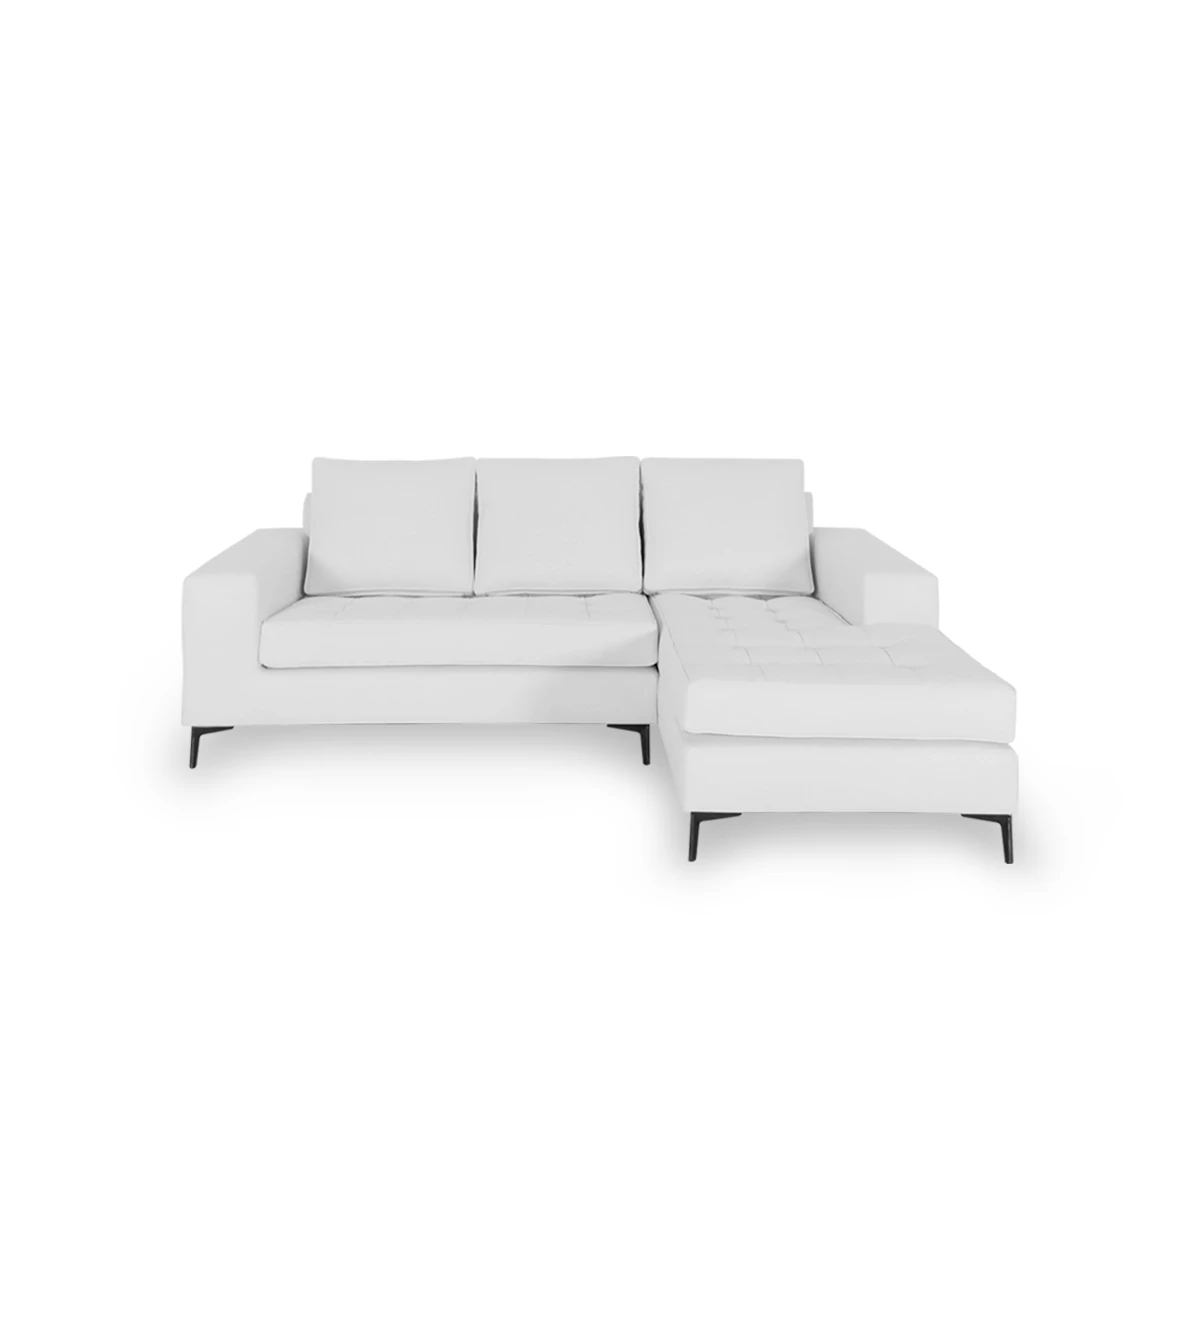 2 seater sofa with chaise longue, upholstered in white eco-leather, with black lacquered metal feet.